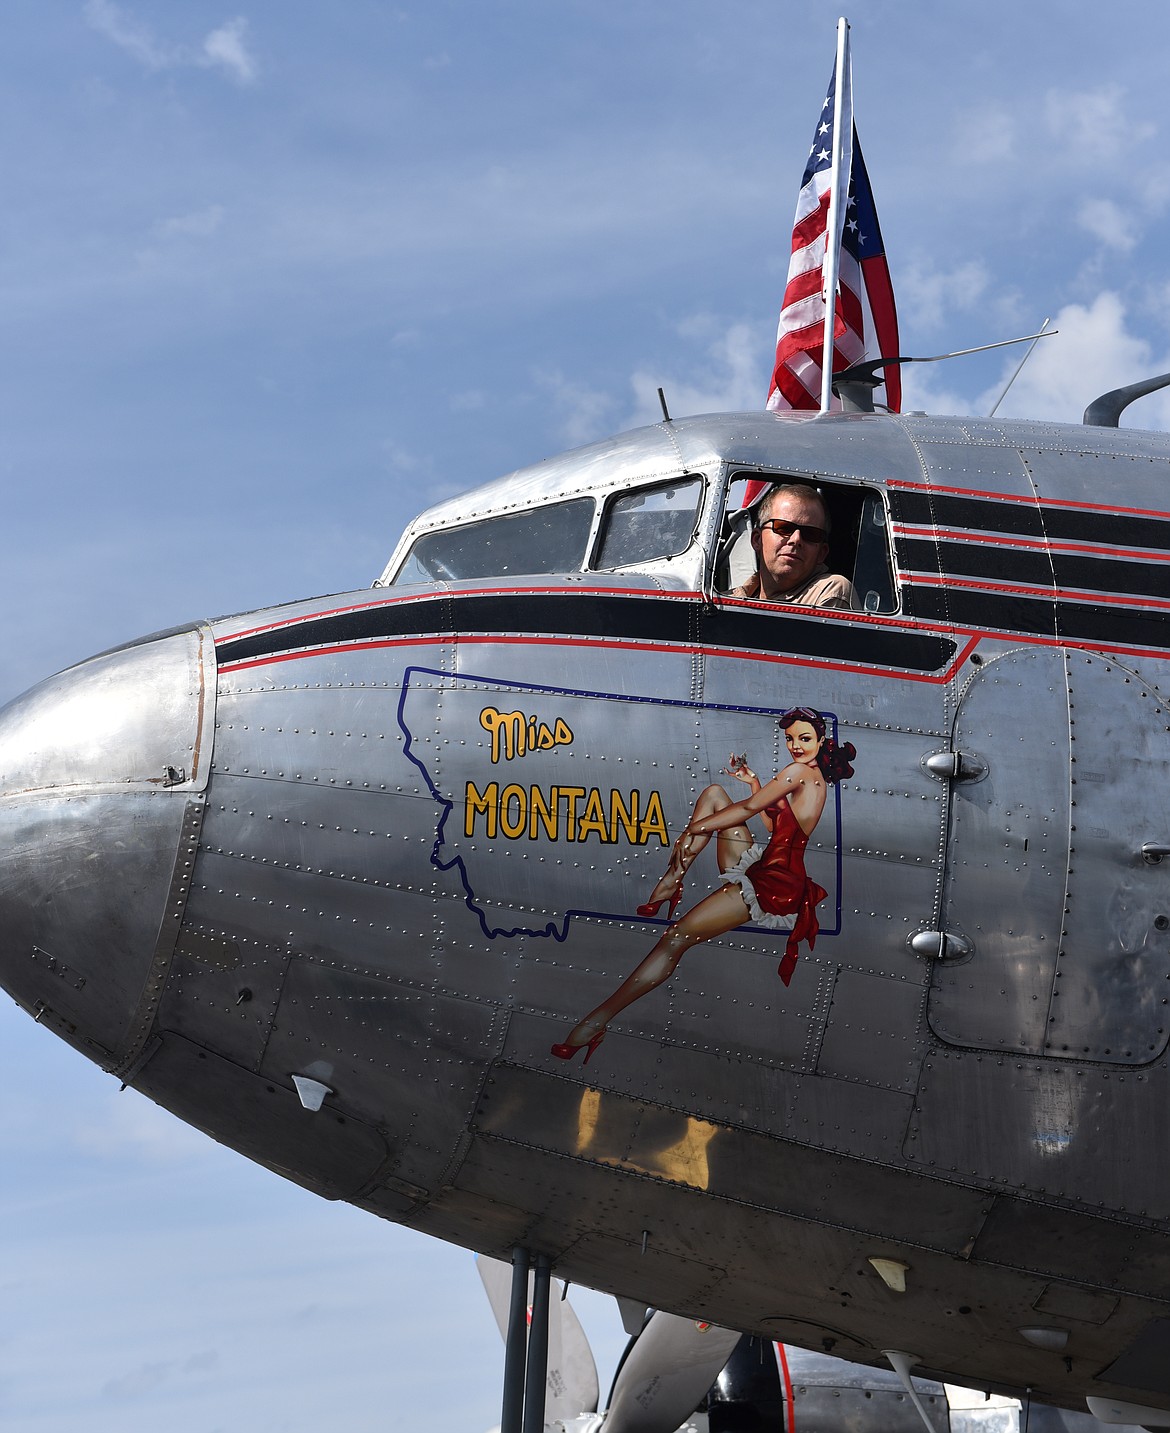 &#147;I AM extremely fortunate to be in the left seat,&#148; says Sanders County native Art Dykstra of his first flight in Miss Montana, landing in Plains May 14.